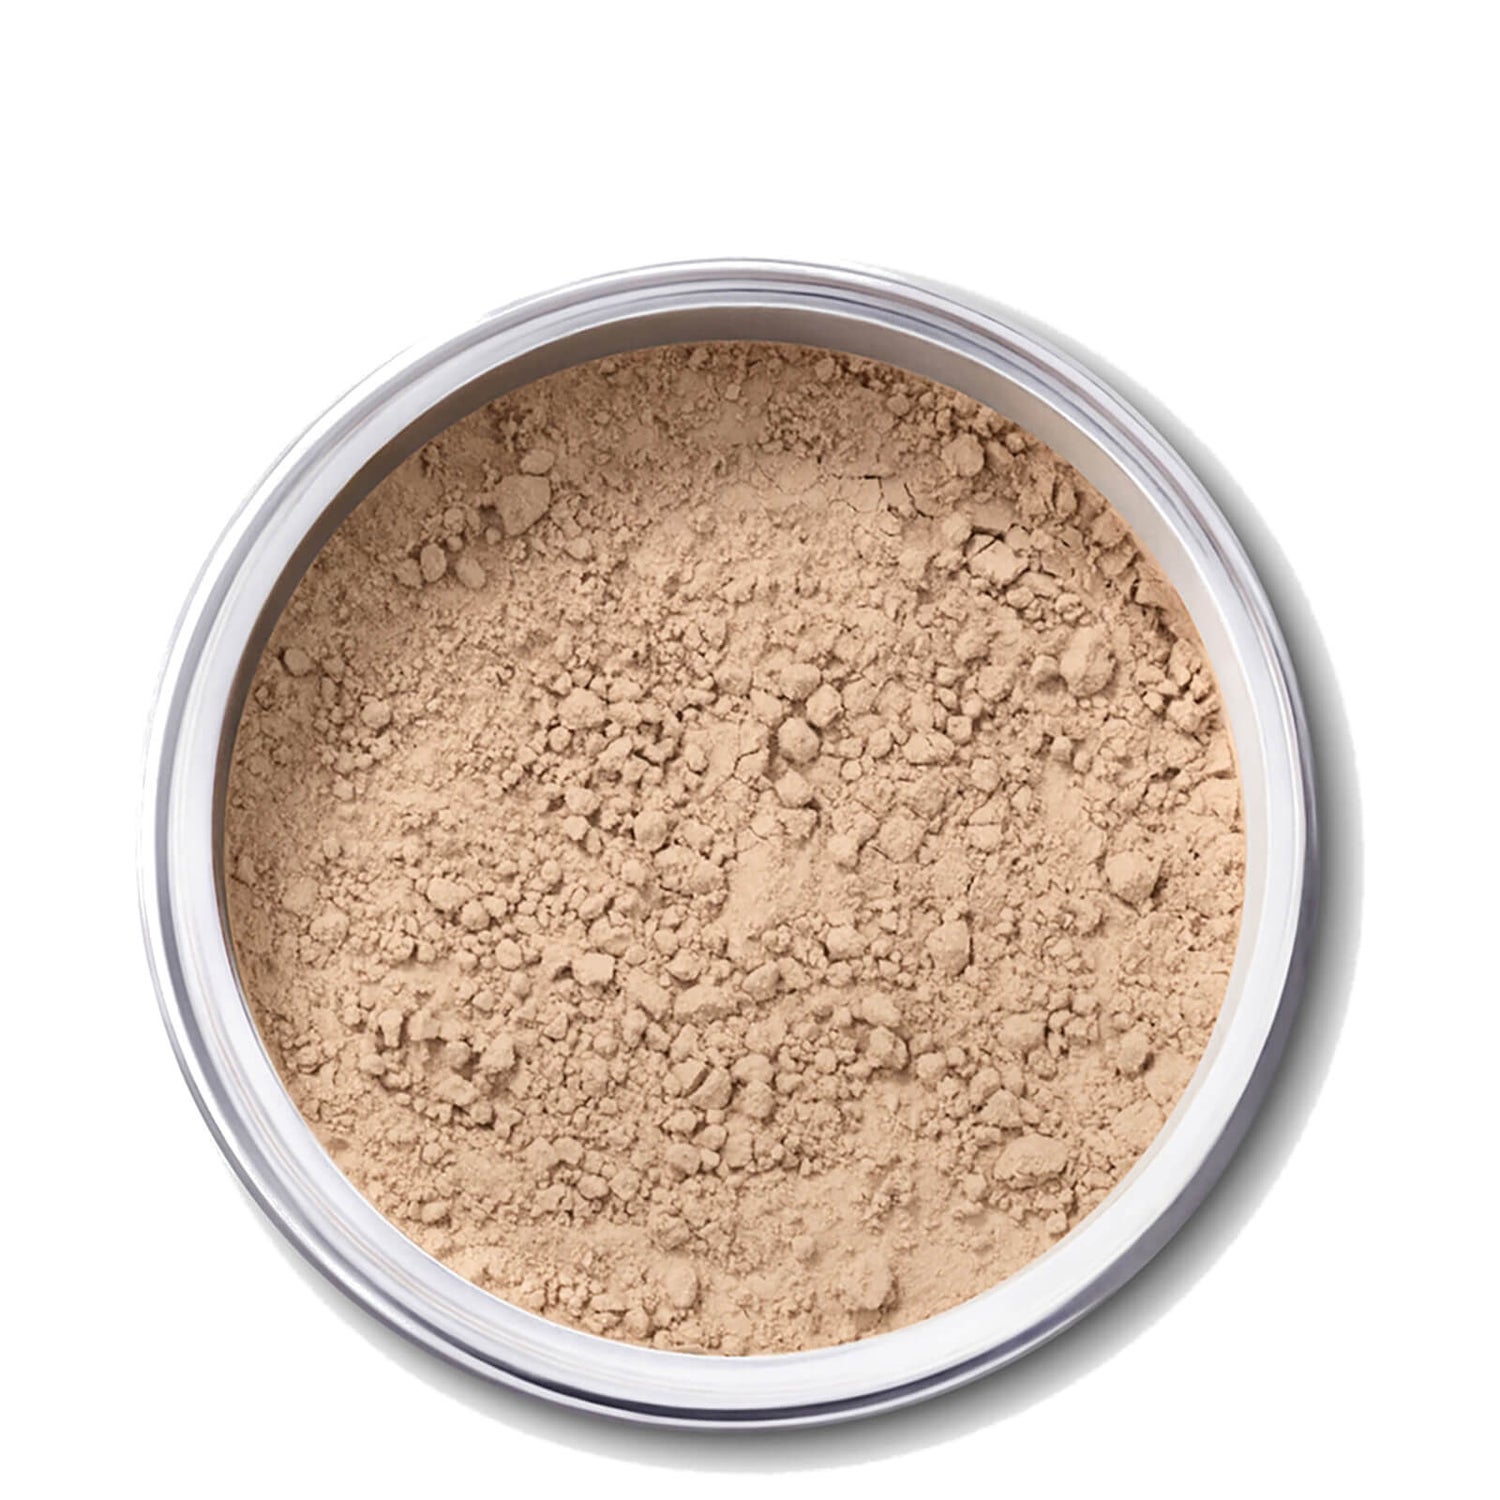 EX1 Cosmetics Pure Crushed Mineral Powder Foundation 8 g (Various Shades)